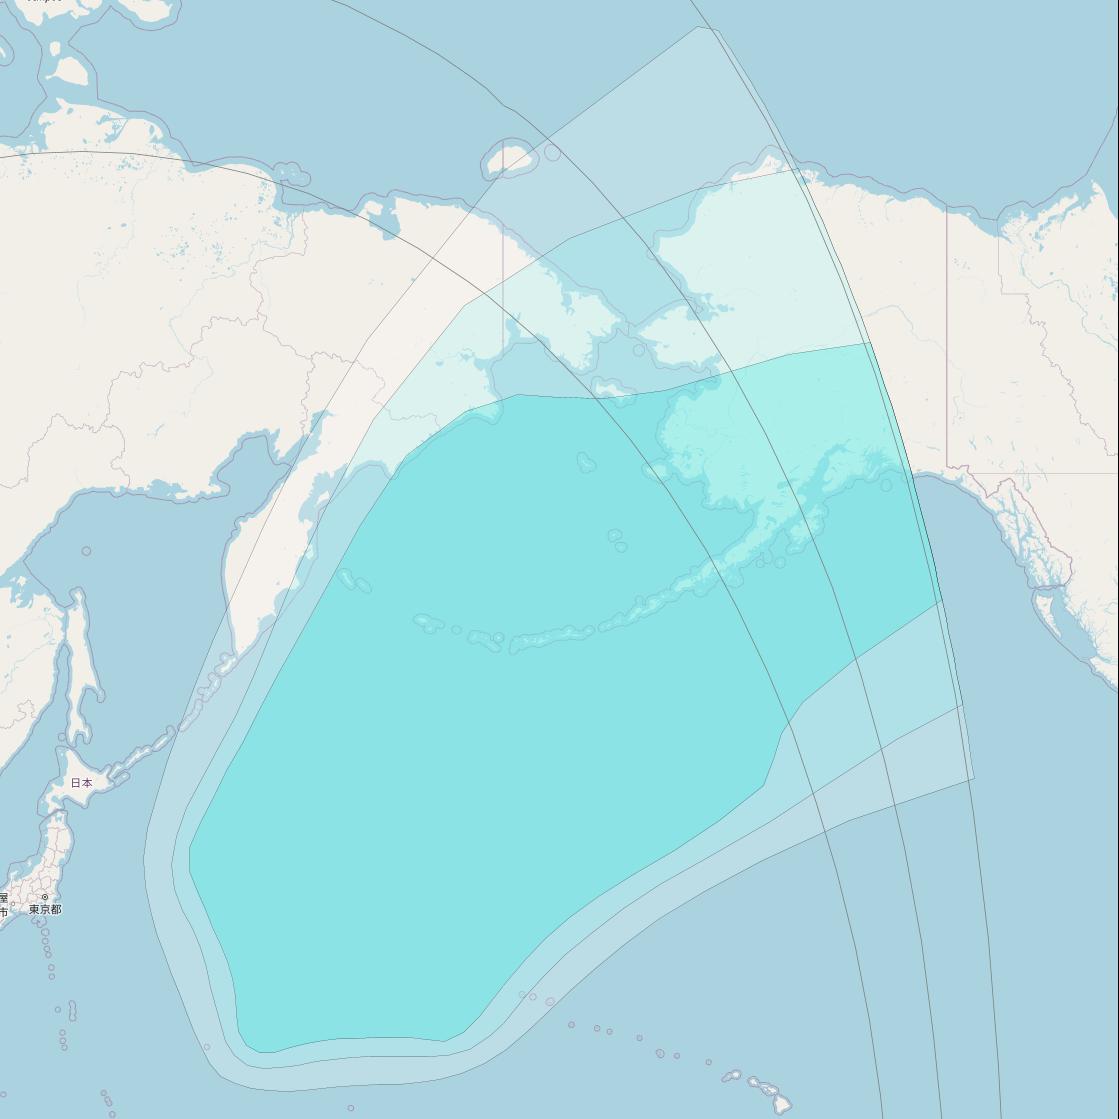 Inmarsat-4F1 at 143° E downlink L-band R007 Regional Spot beam coverage map